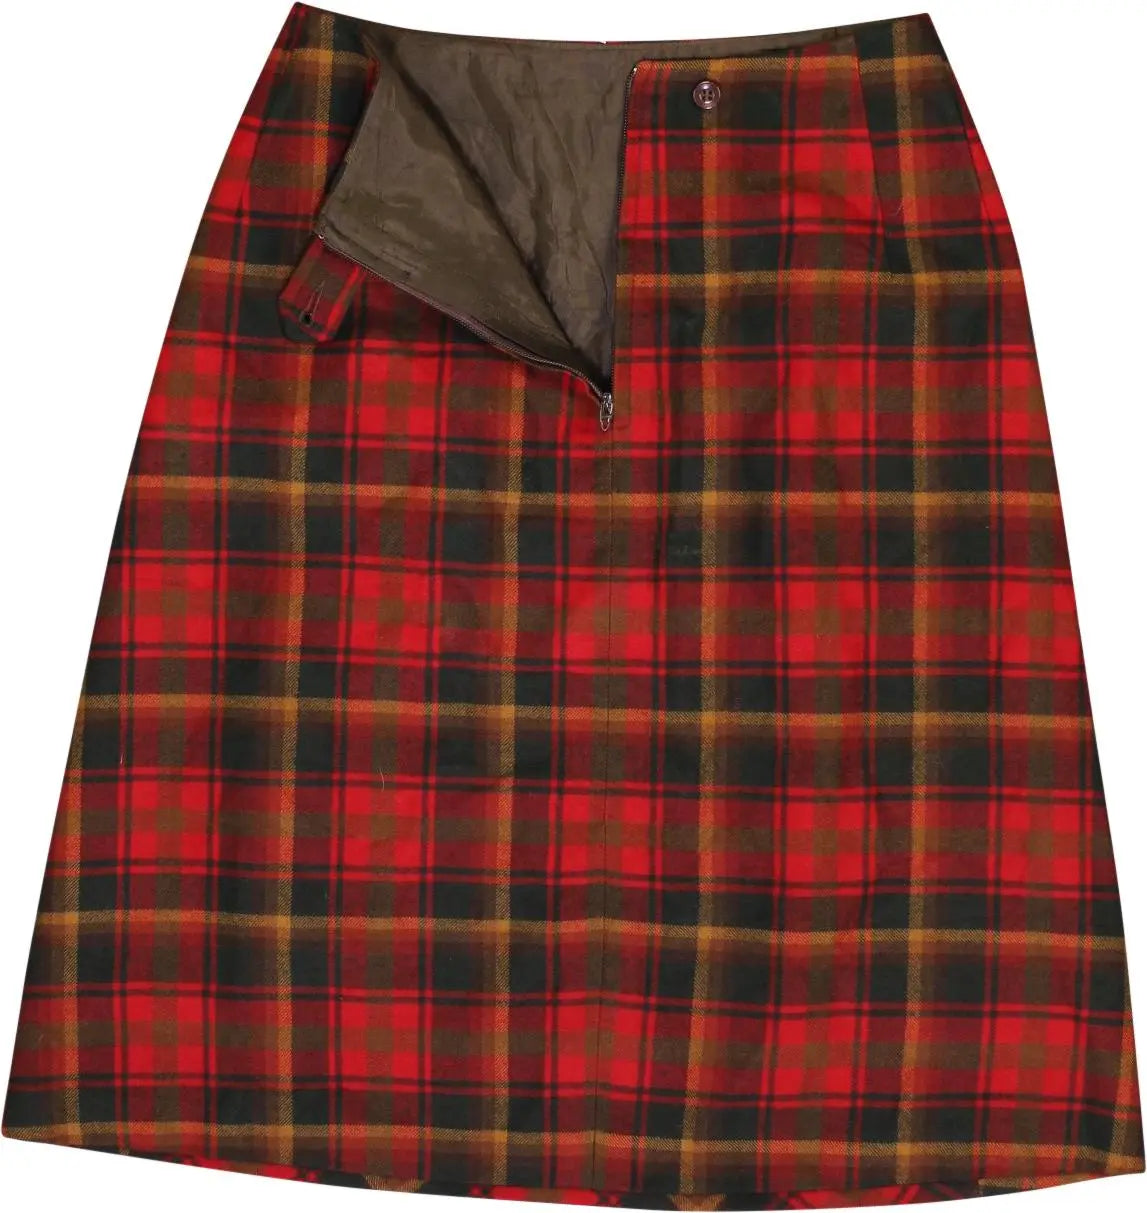 Highland Queen - Tartan Skirt by Highland Queen- ThriftTale.com - Vintage and second handclothing